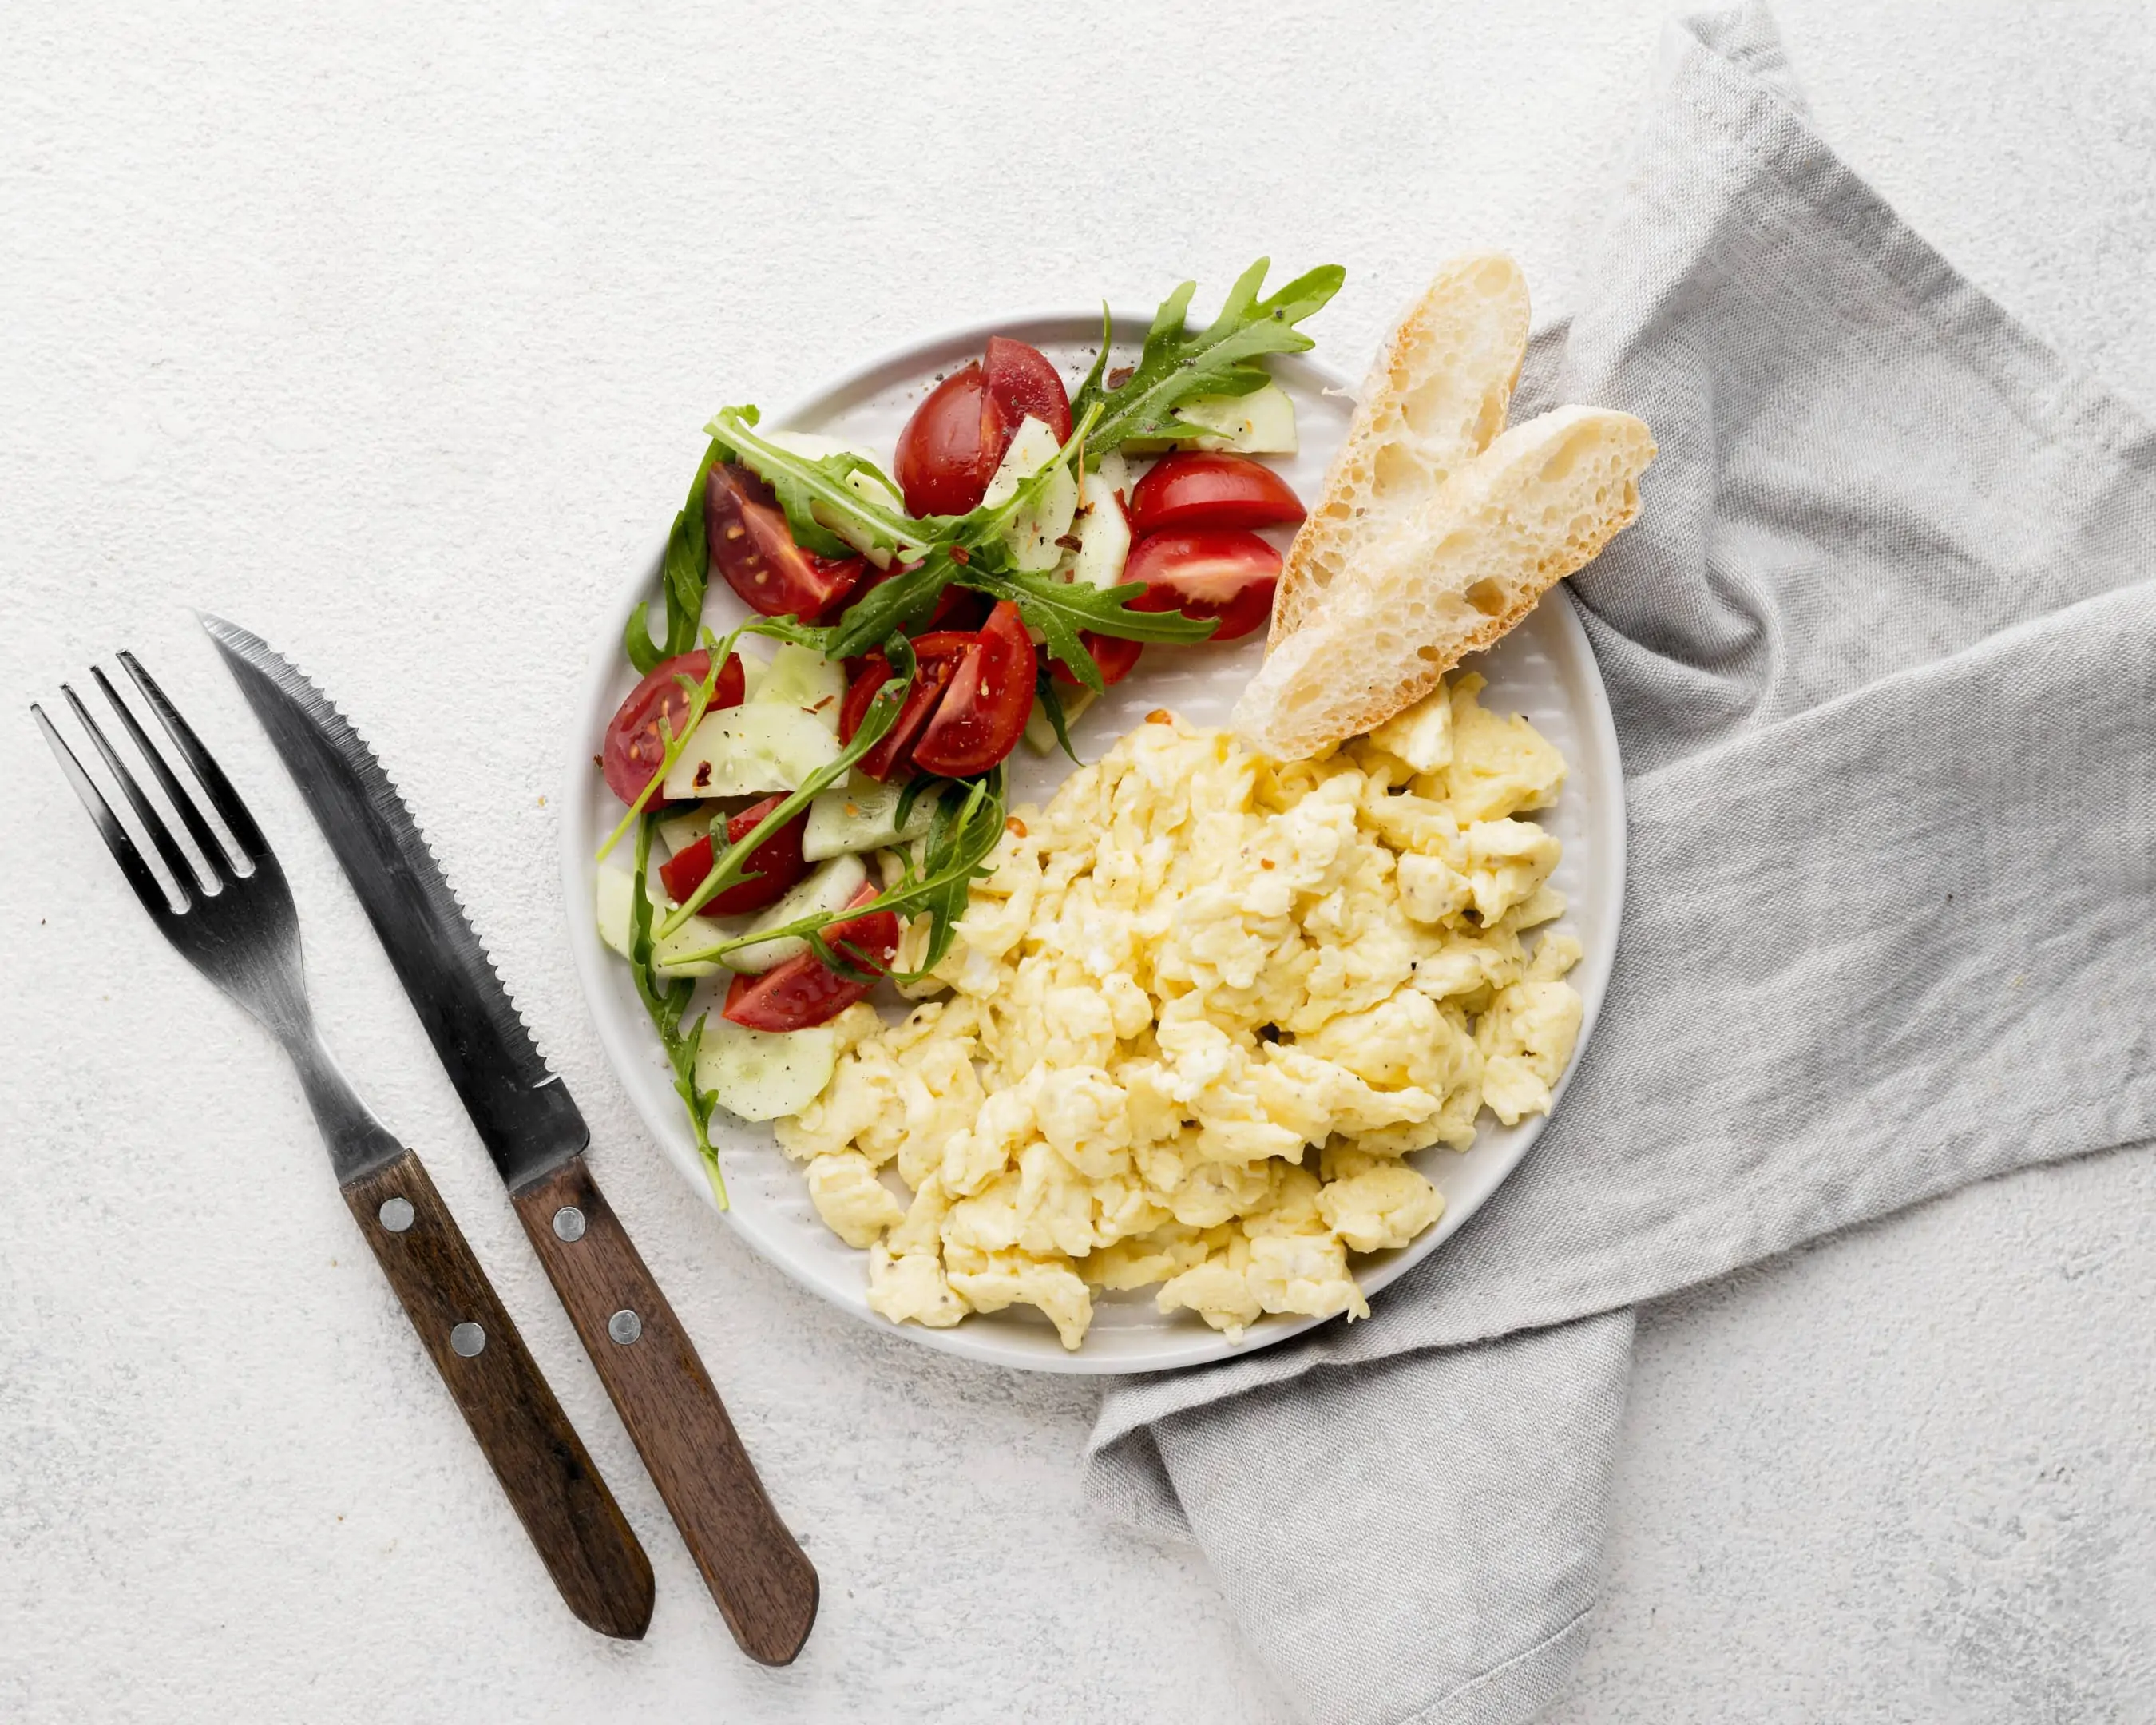 Plate of scrambled eggs and salad